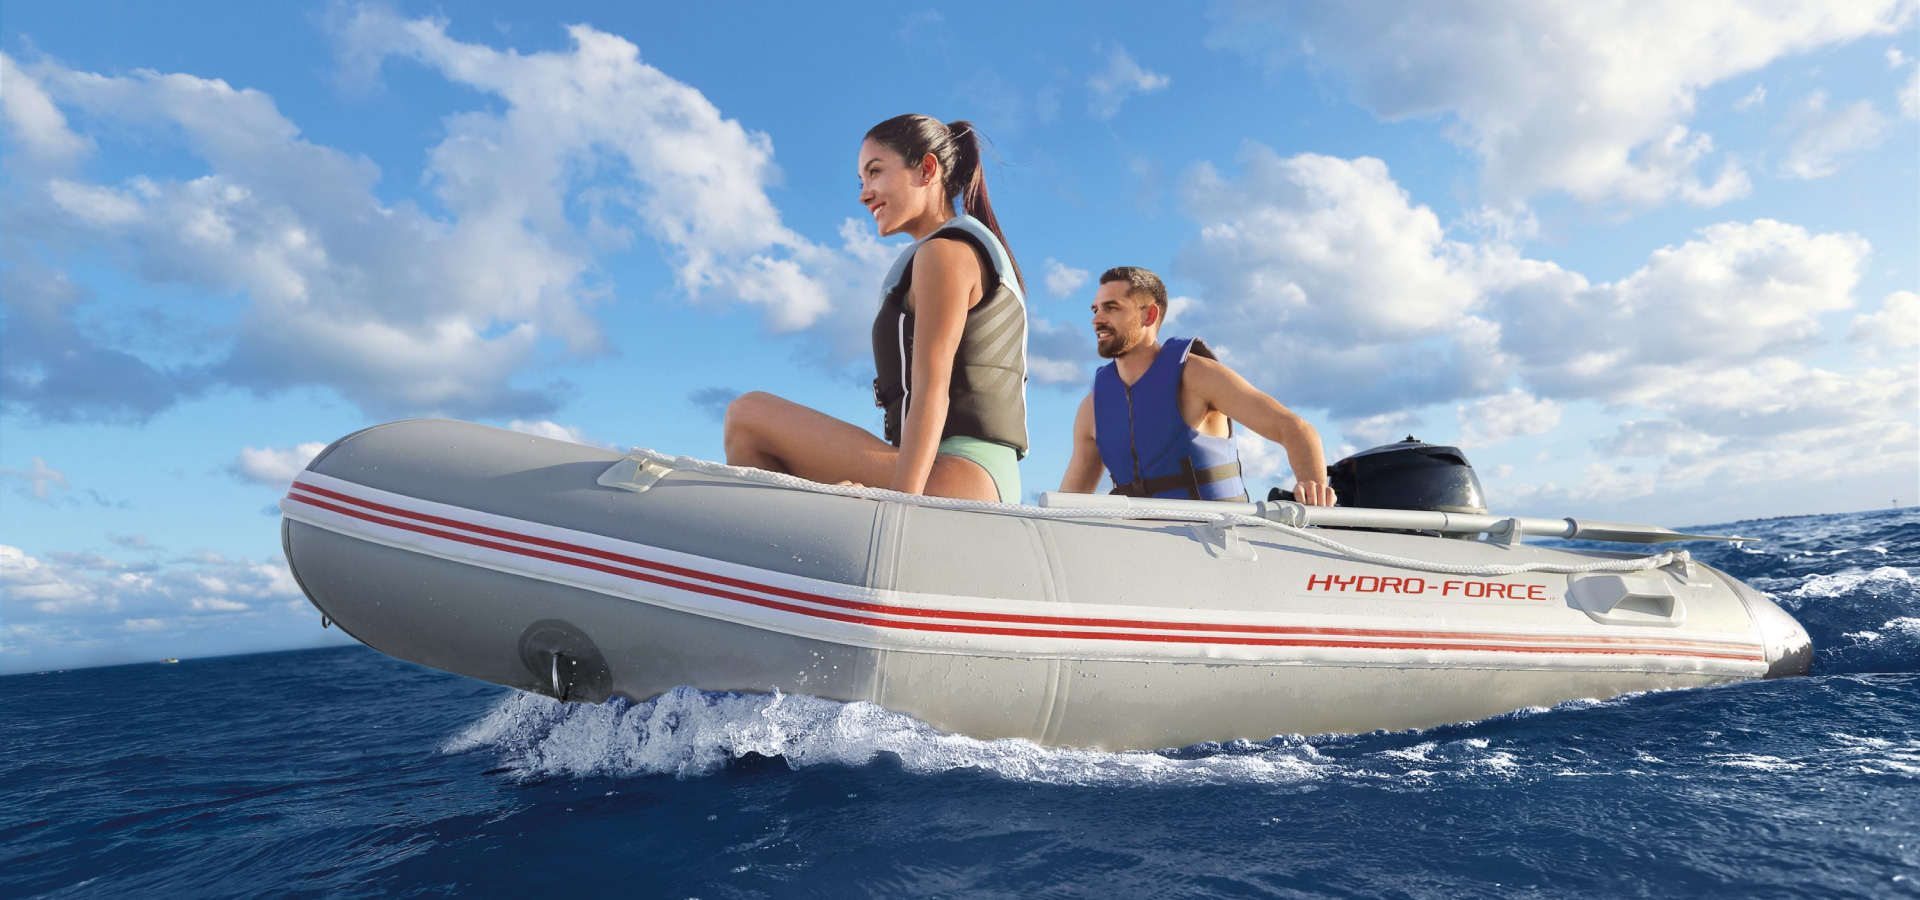 How to choose an inflatable boat